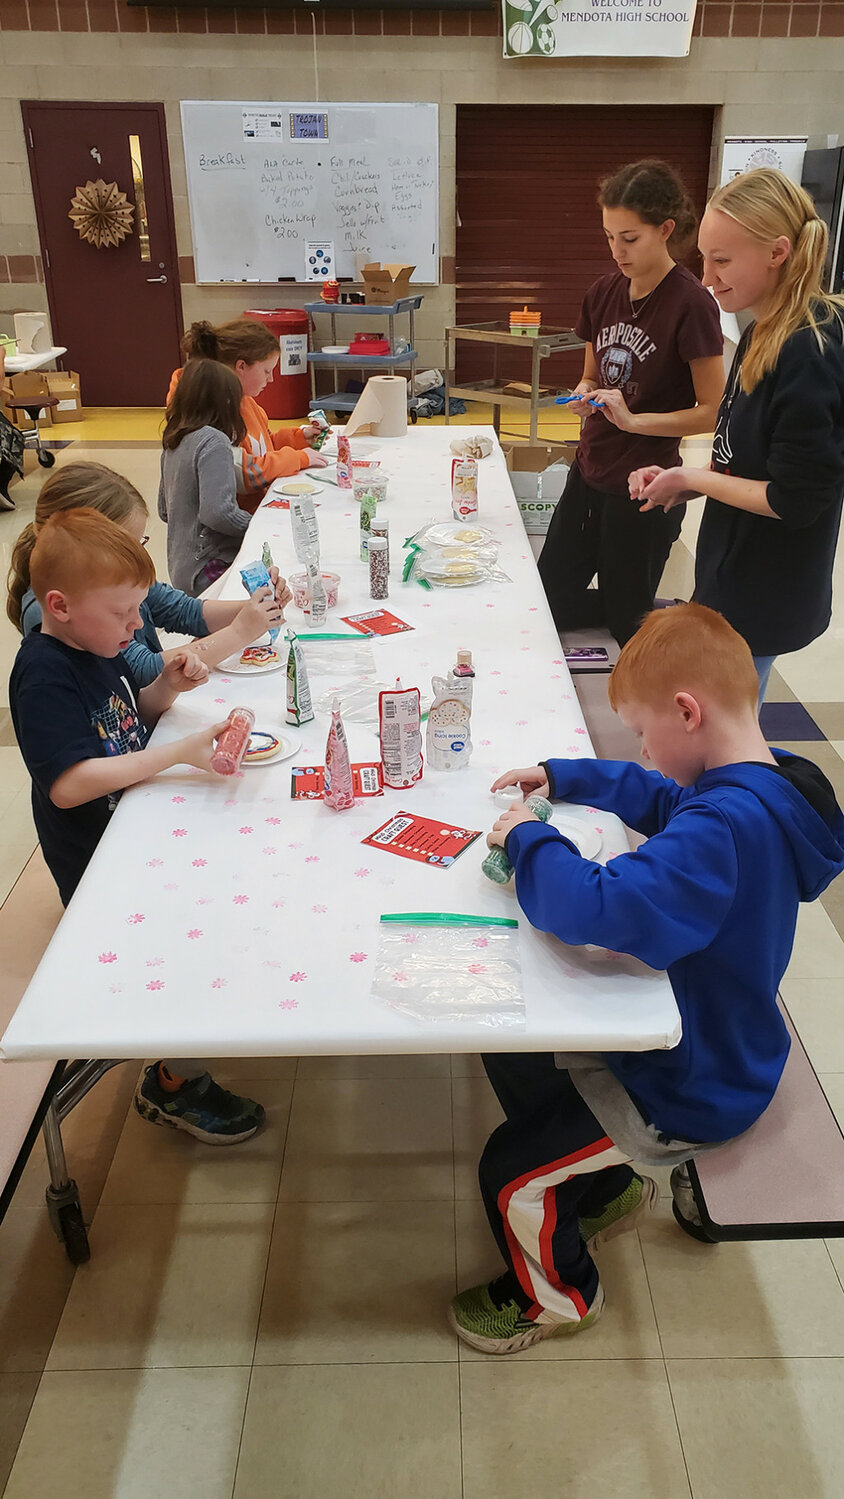 Mendota High School Interact Club members help children make neat Christmas stuff as part of a fundraiser for the school’s art department. (Reporter photo by Brandon LaChance)